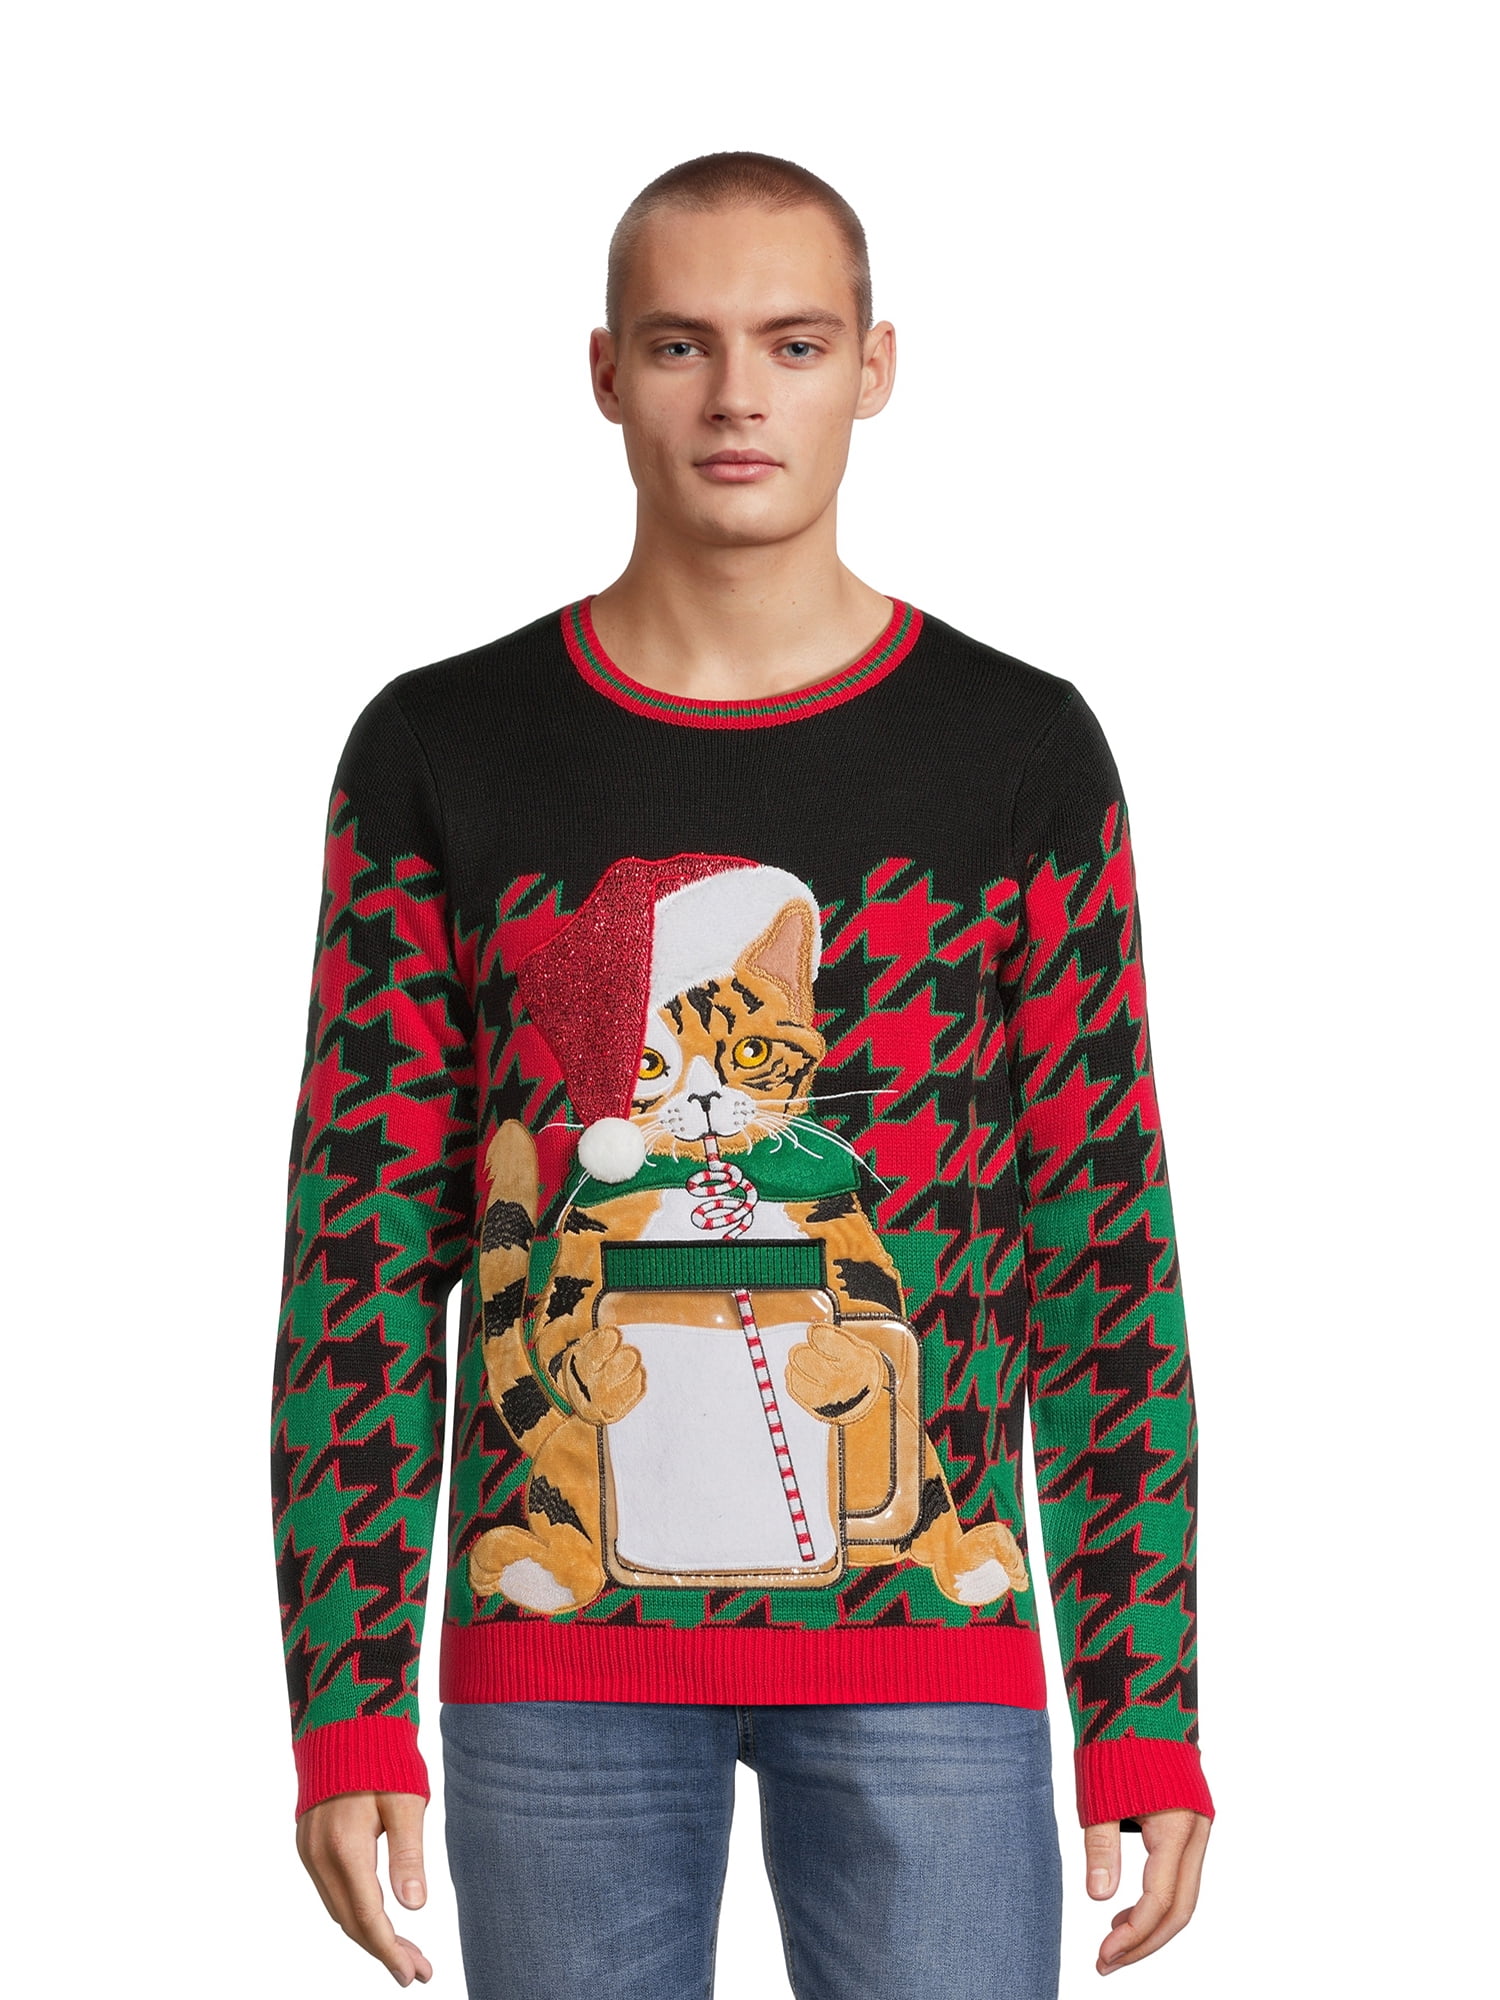 Jolly Sweaters Men's and Big Men's Ugly Christmas Sweater, Sizes S-3XL ...